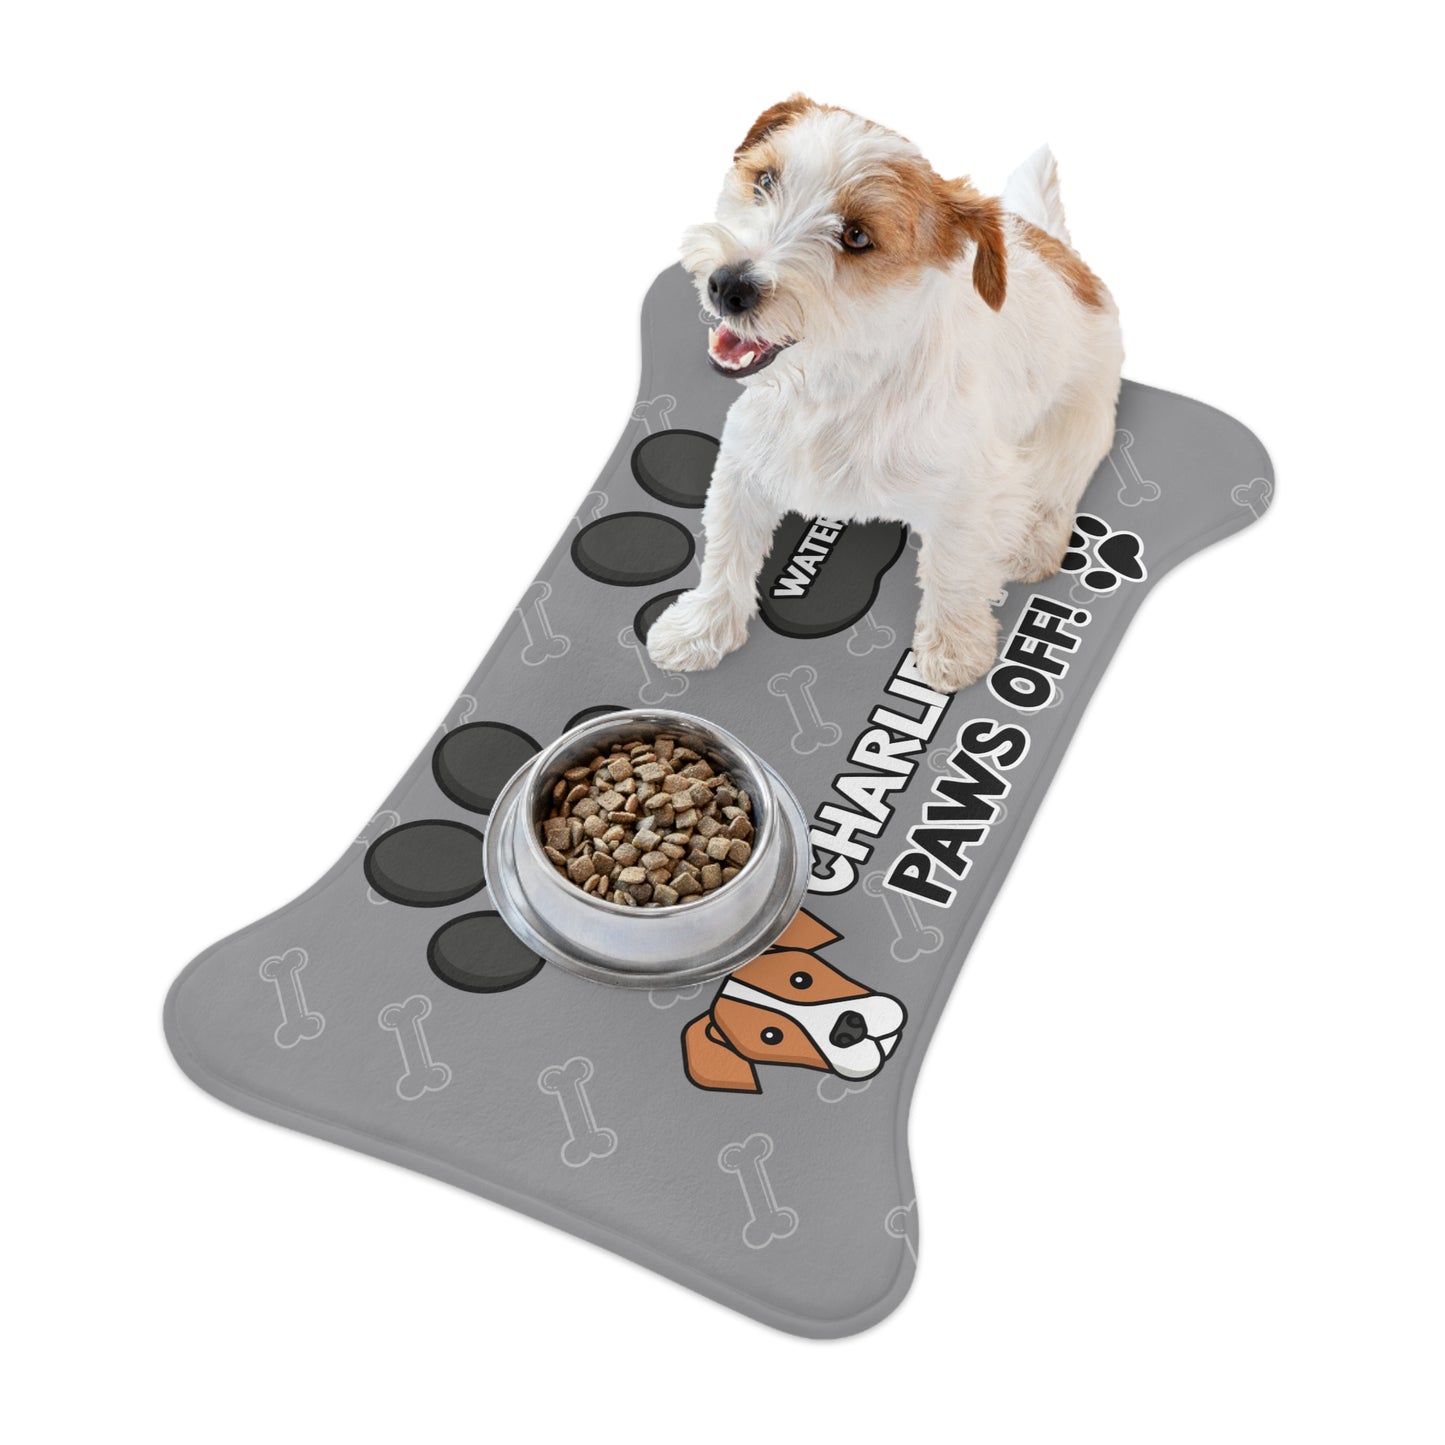 a cute dog on top of a personalized dog food mat with the a bone shape, two big paws with the words "Food" and "Water" at the top. And the face of a cute dog next to the words "Dog's Food Paws Off!". Color of the pet feeding mat is grey